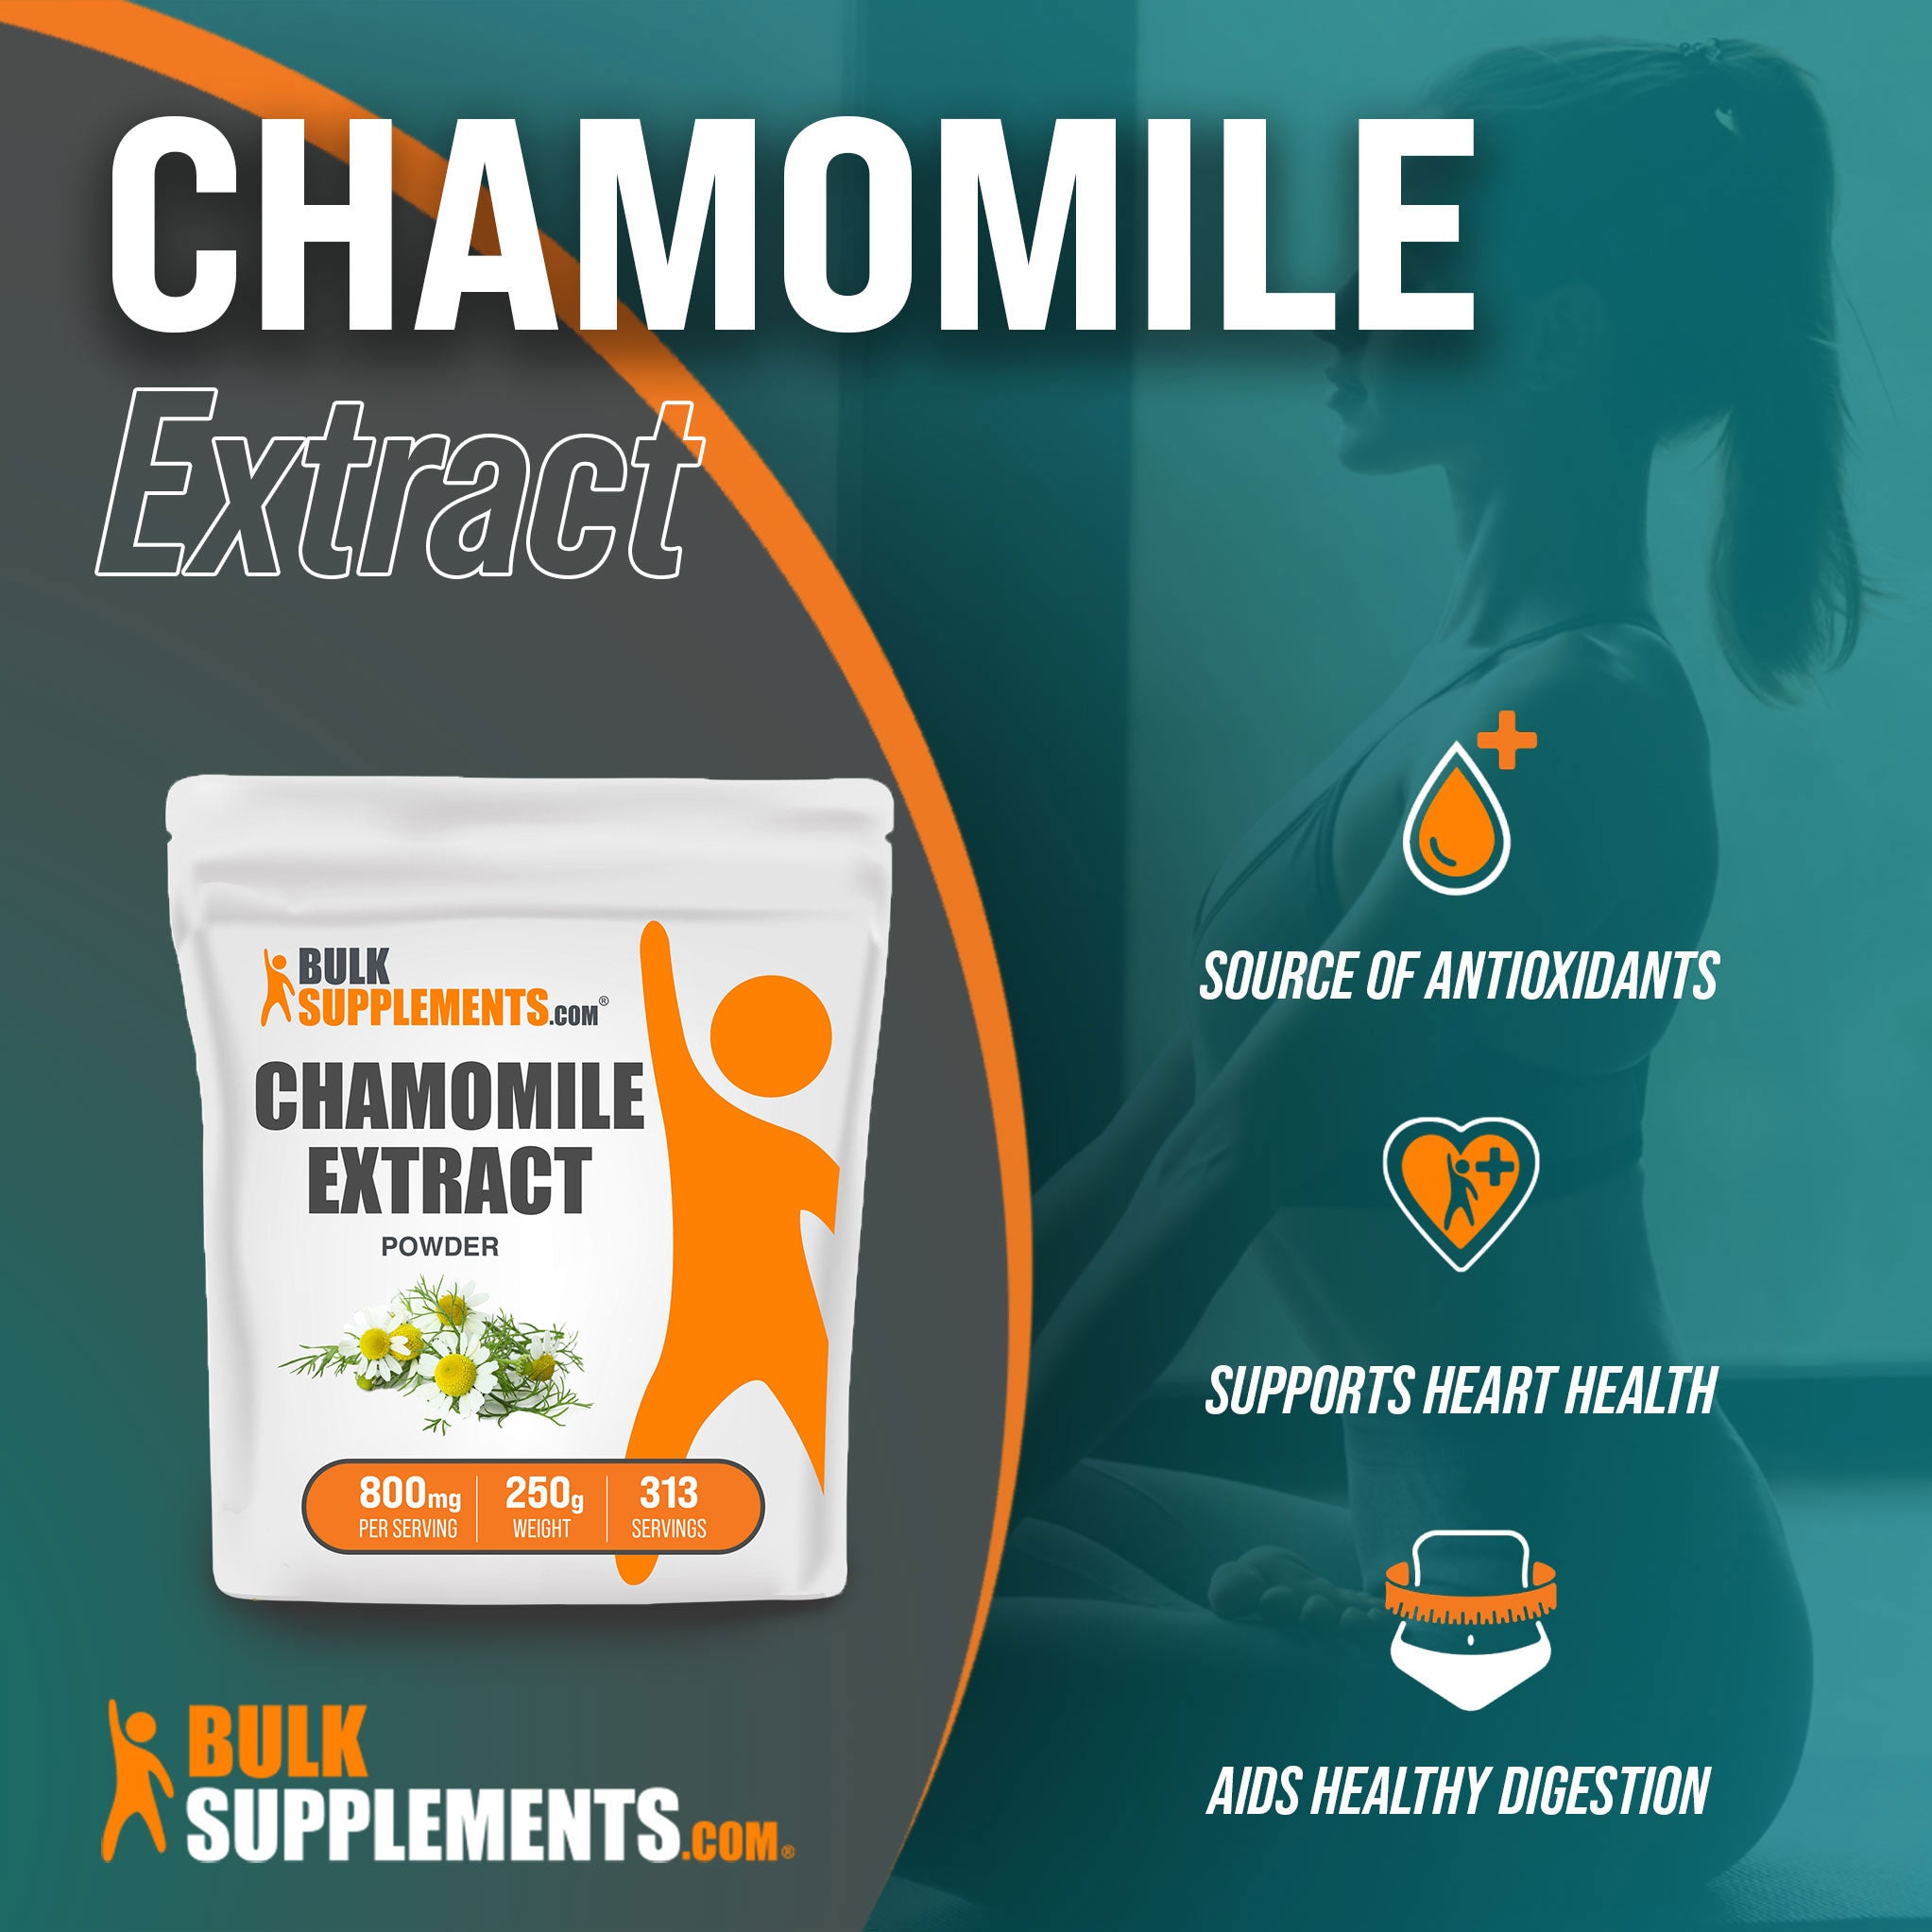 Benefits of our 250g Chamomile Extract herbal supplements; source of antioxidants, supports heart health, aids healthy digestion